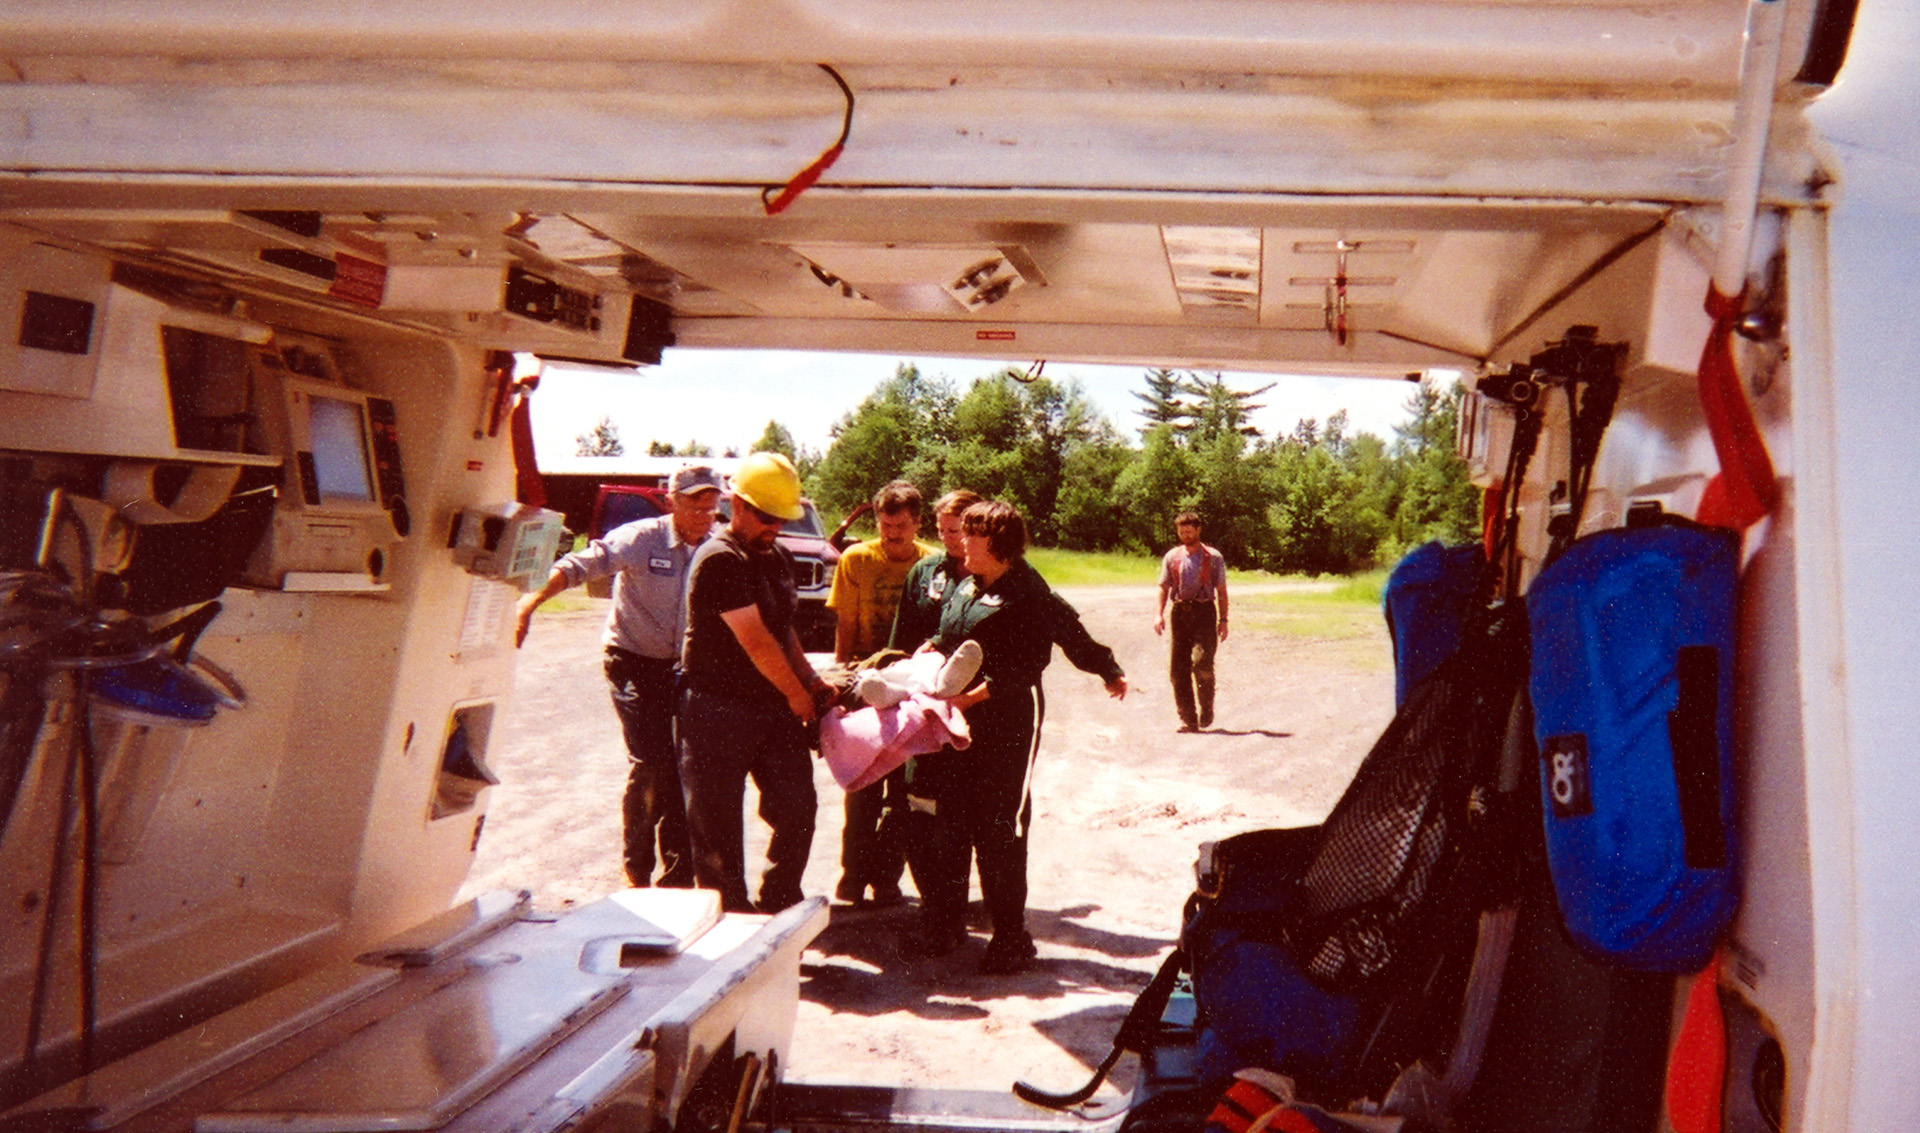 Archival image of Lifeflight crew on a mission